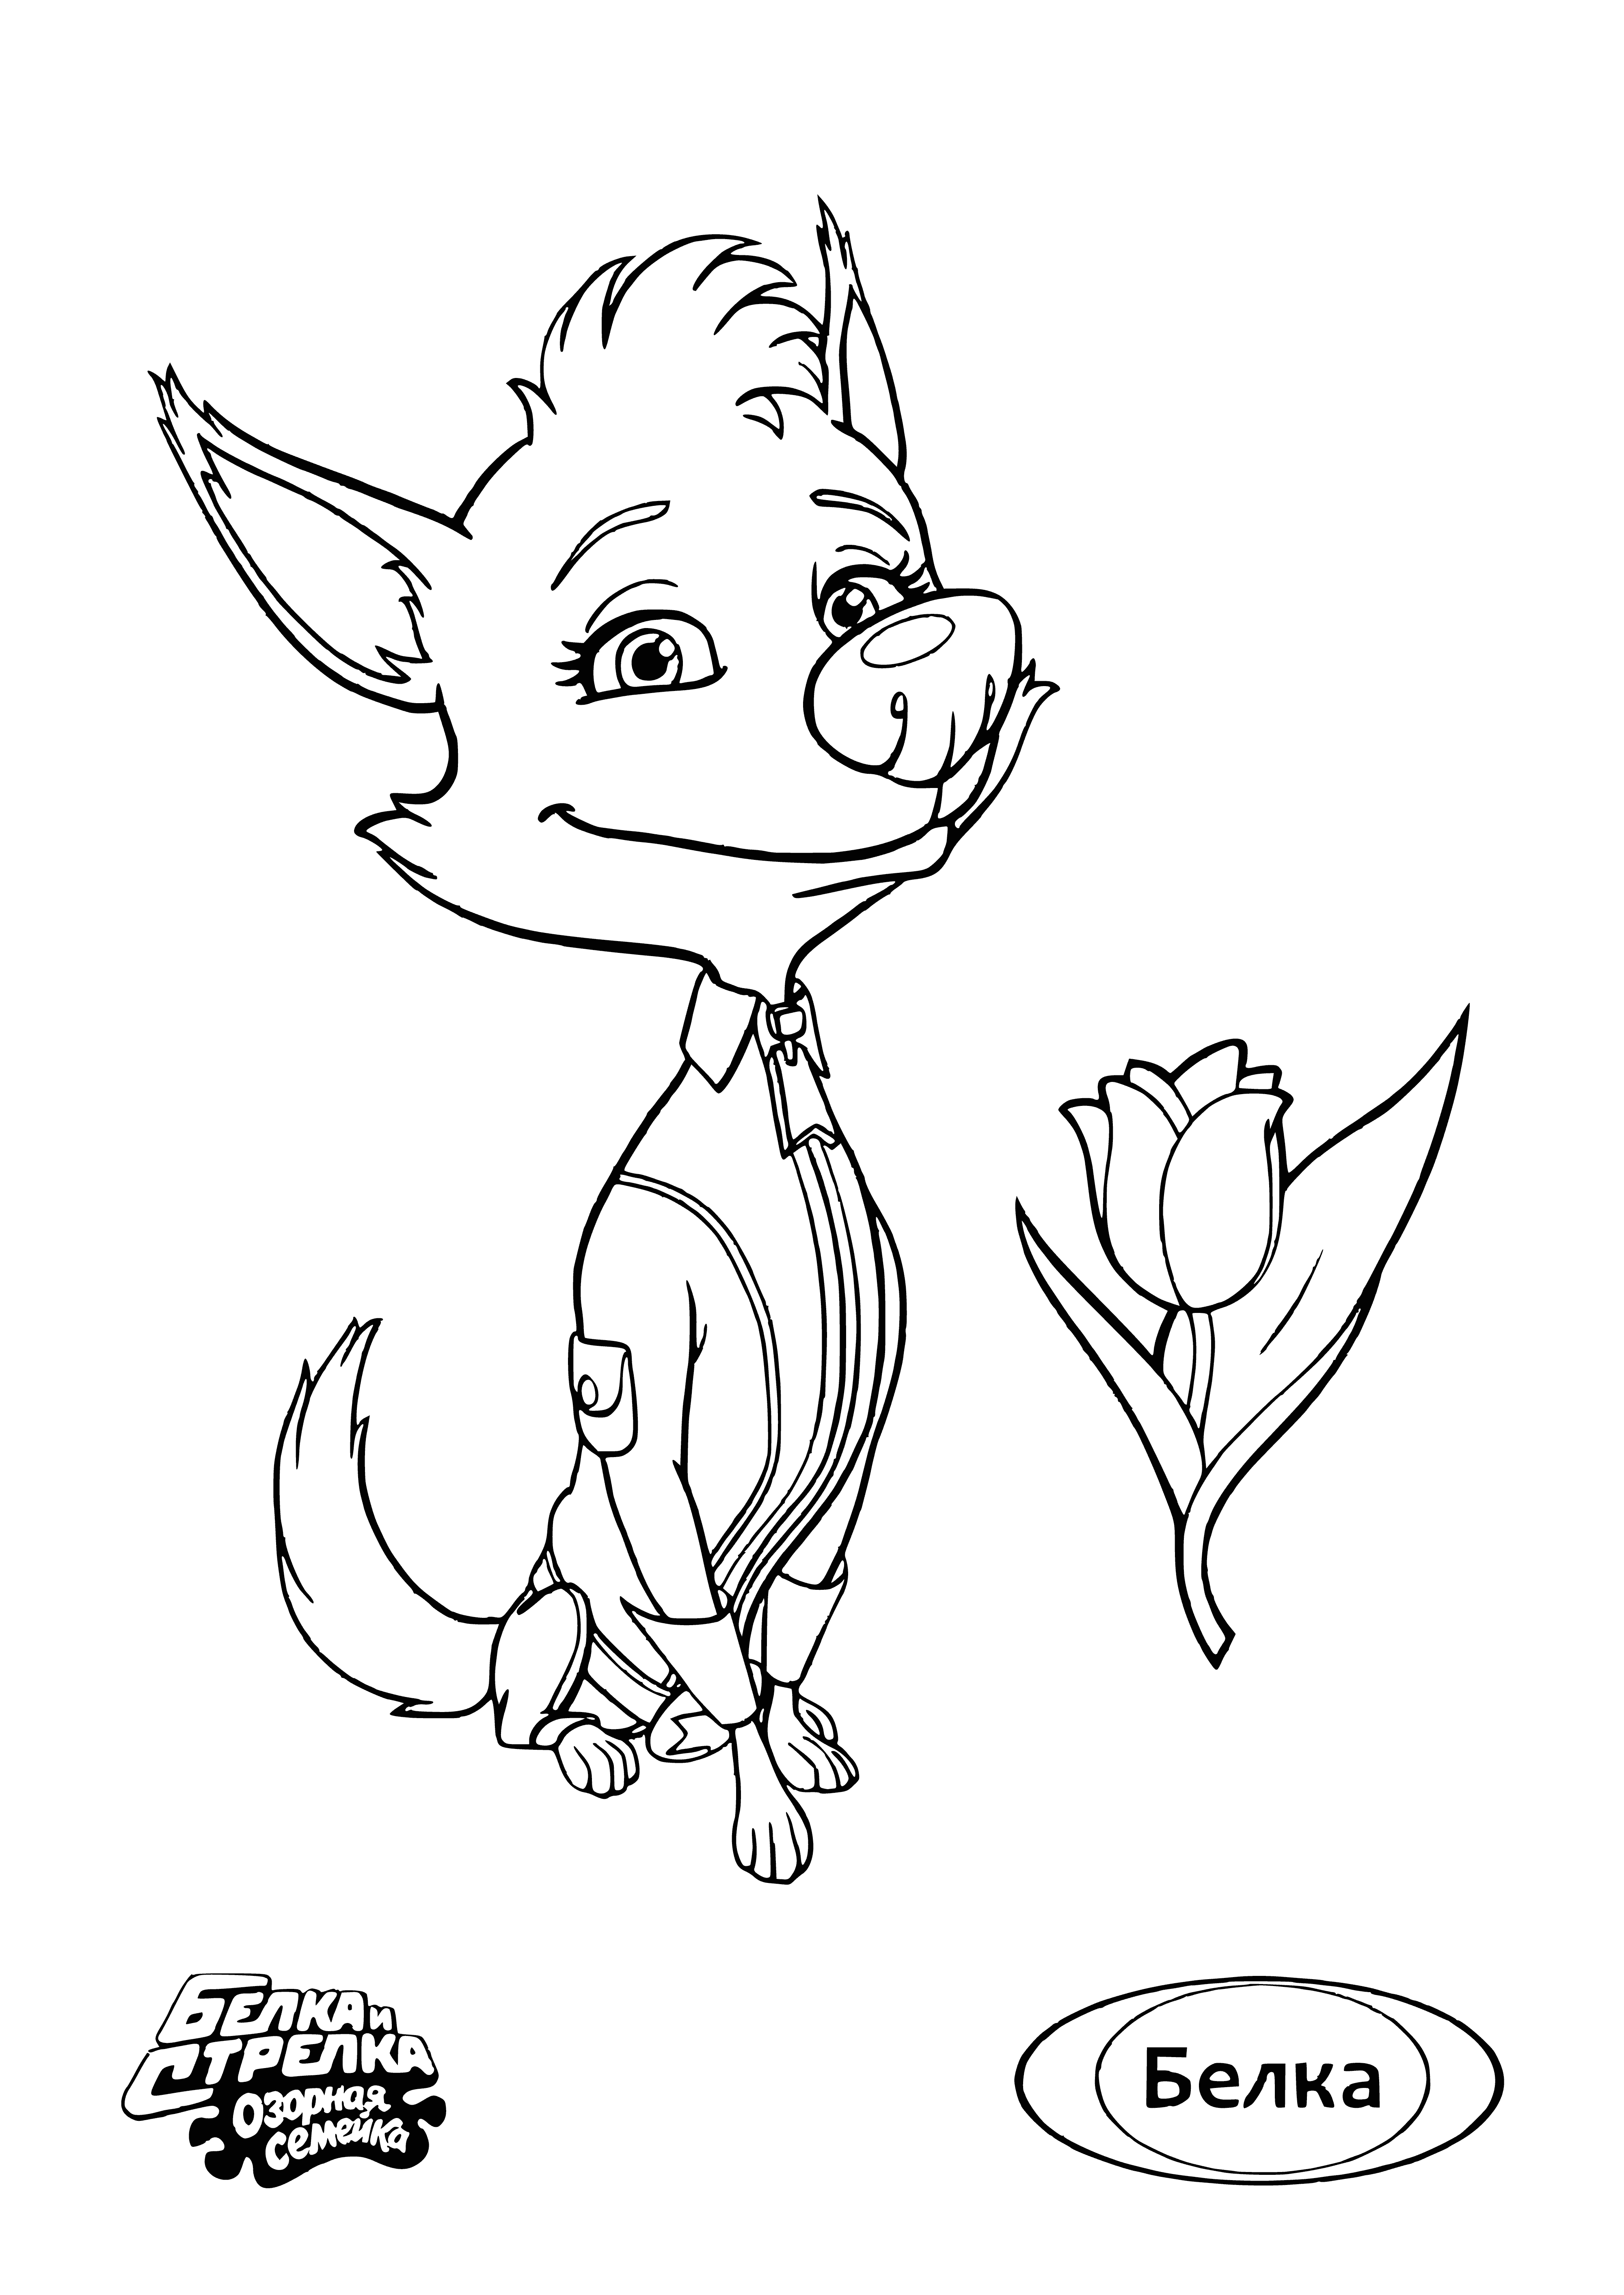 coloring page: Belka & Strelka are two mischievous squirrels with flowers in their mouths, always up to something sure to put a smile on your face.